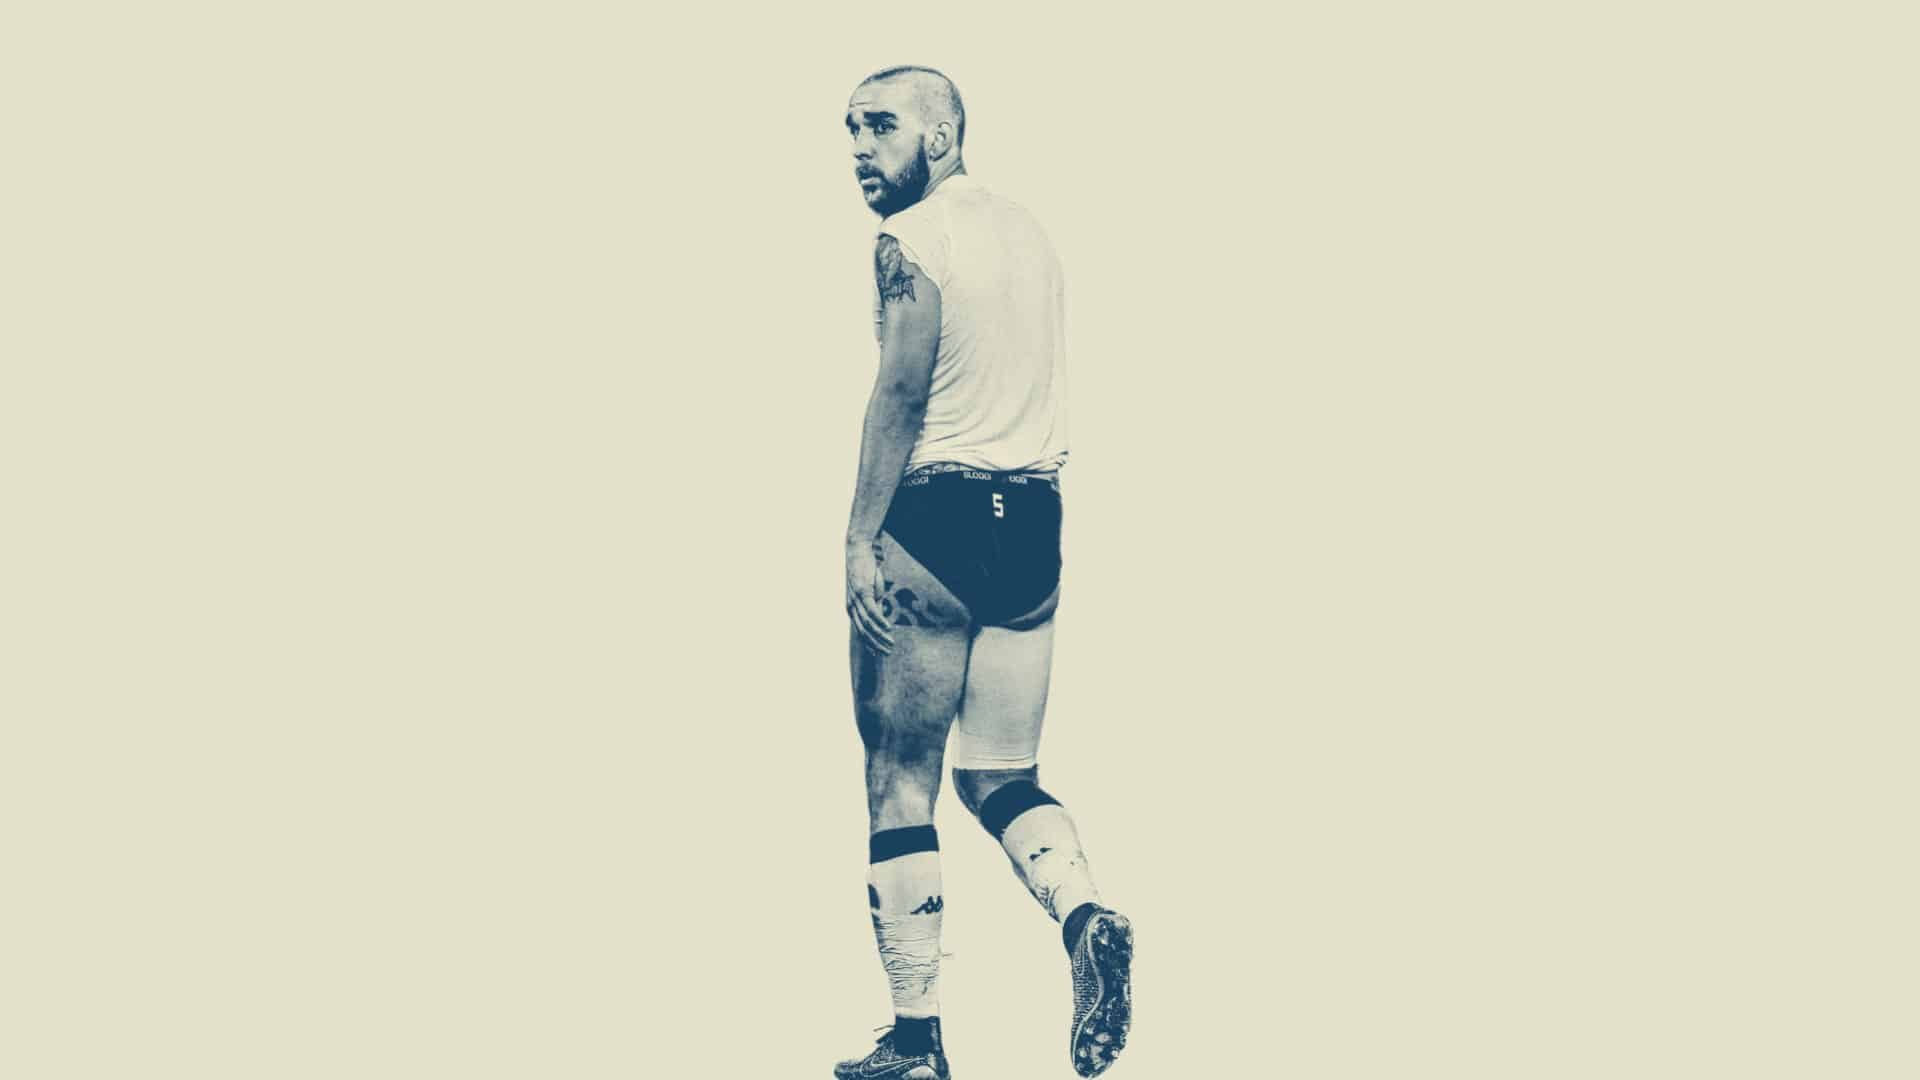 A black and white image of Giuseppe Bellusci at the end of a Leeds game, stripped down to a vest and his underpants. There's a number 5 printed on his arse. He's still got his socks and boots on.